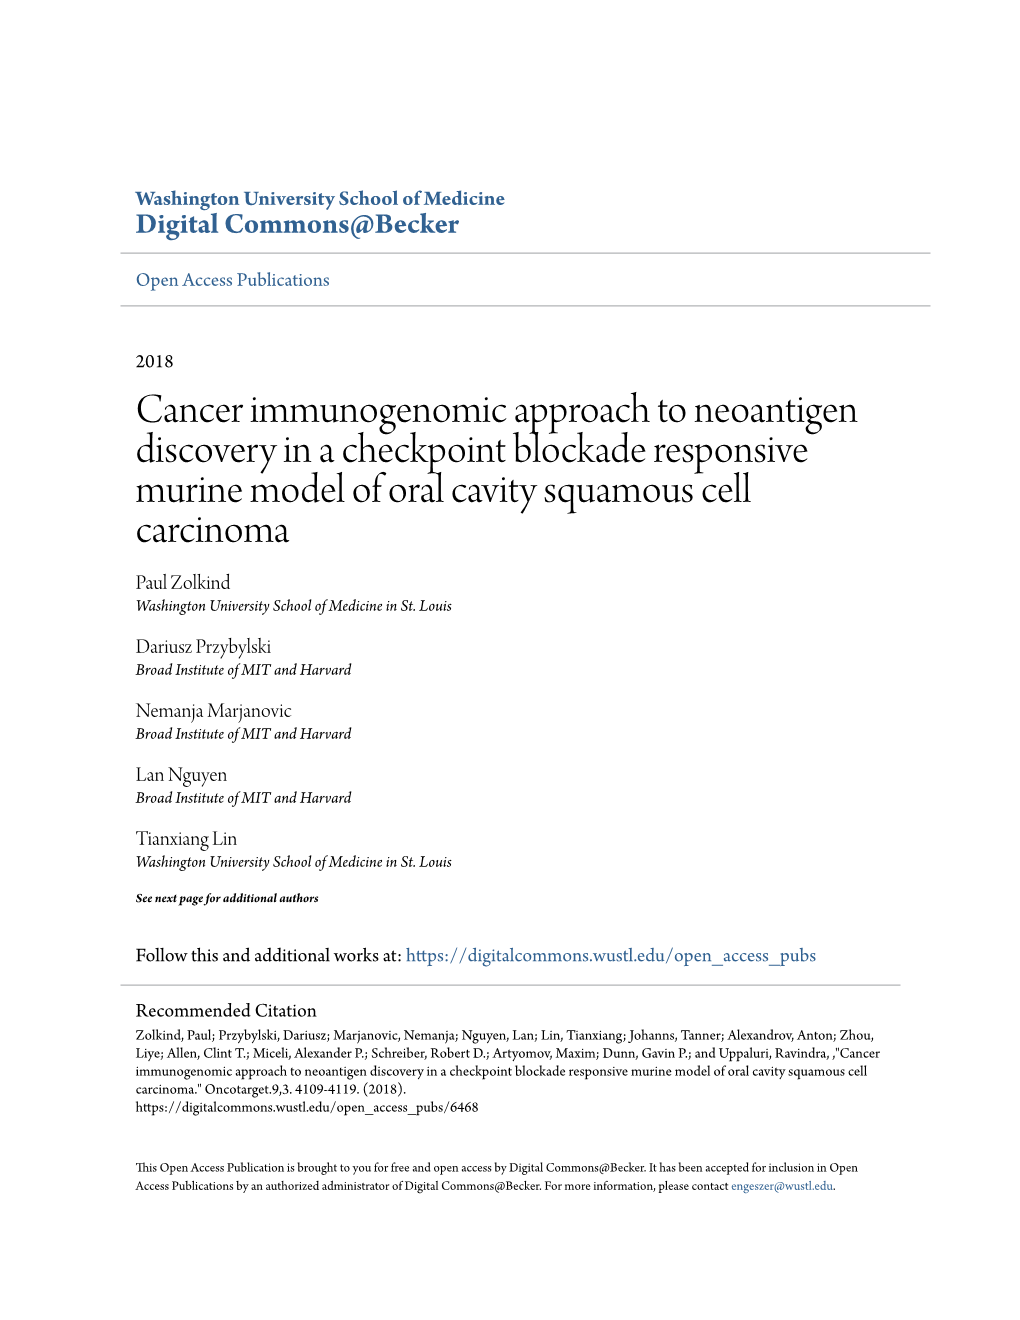 Cancer Immunogenomic Approach to Neoantigen Discovery in A